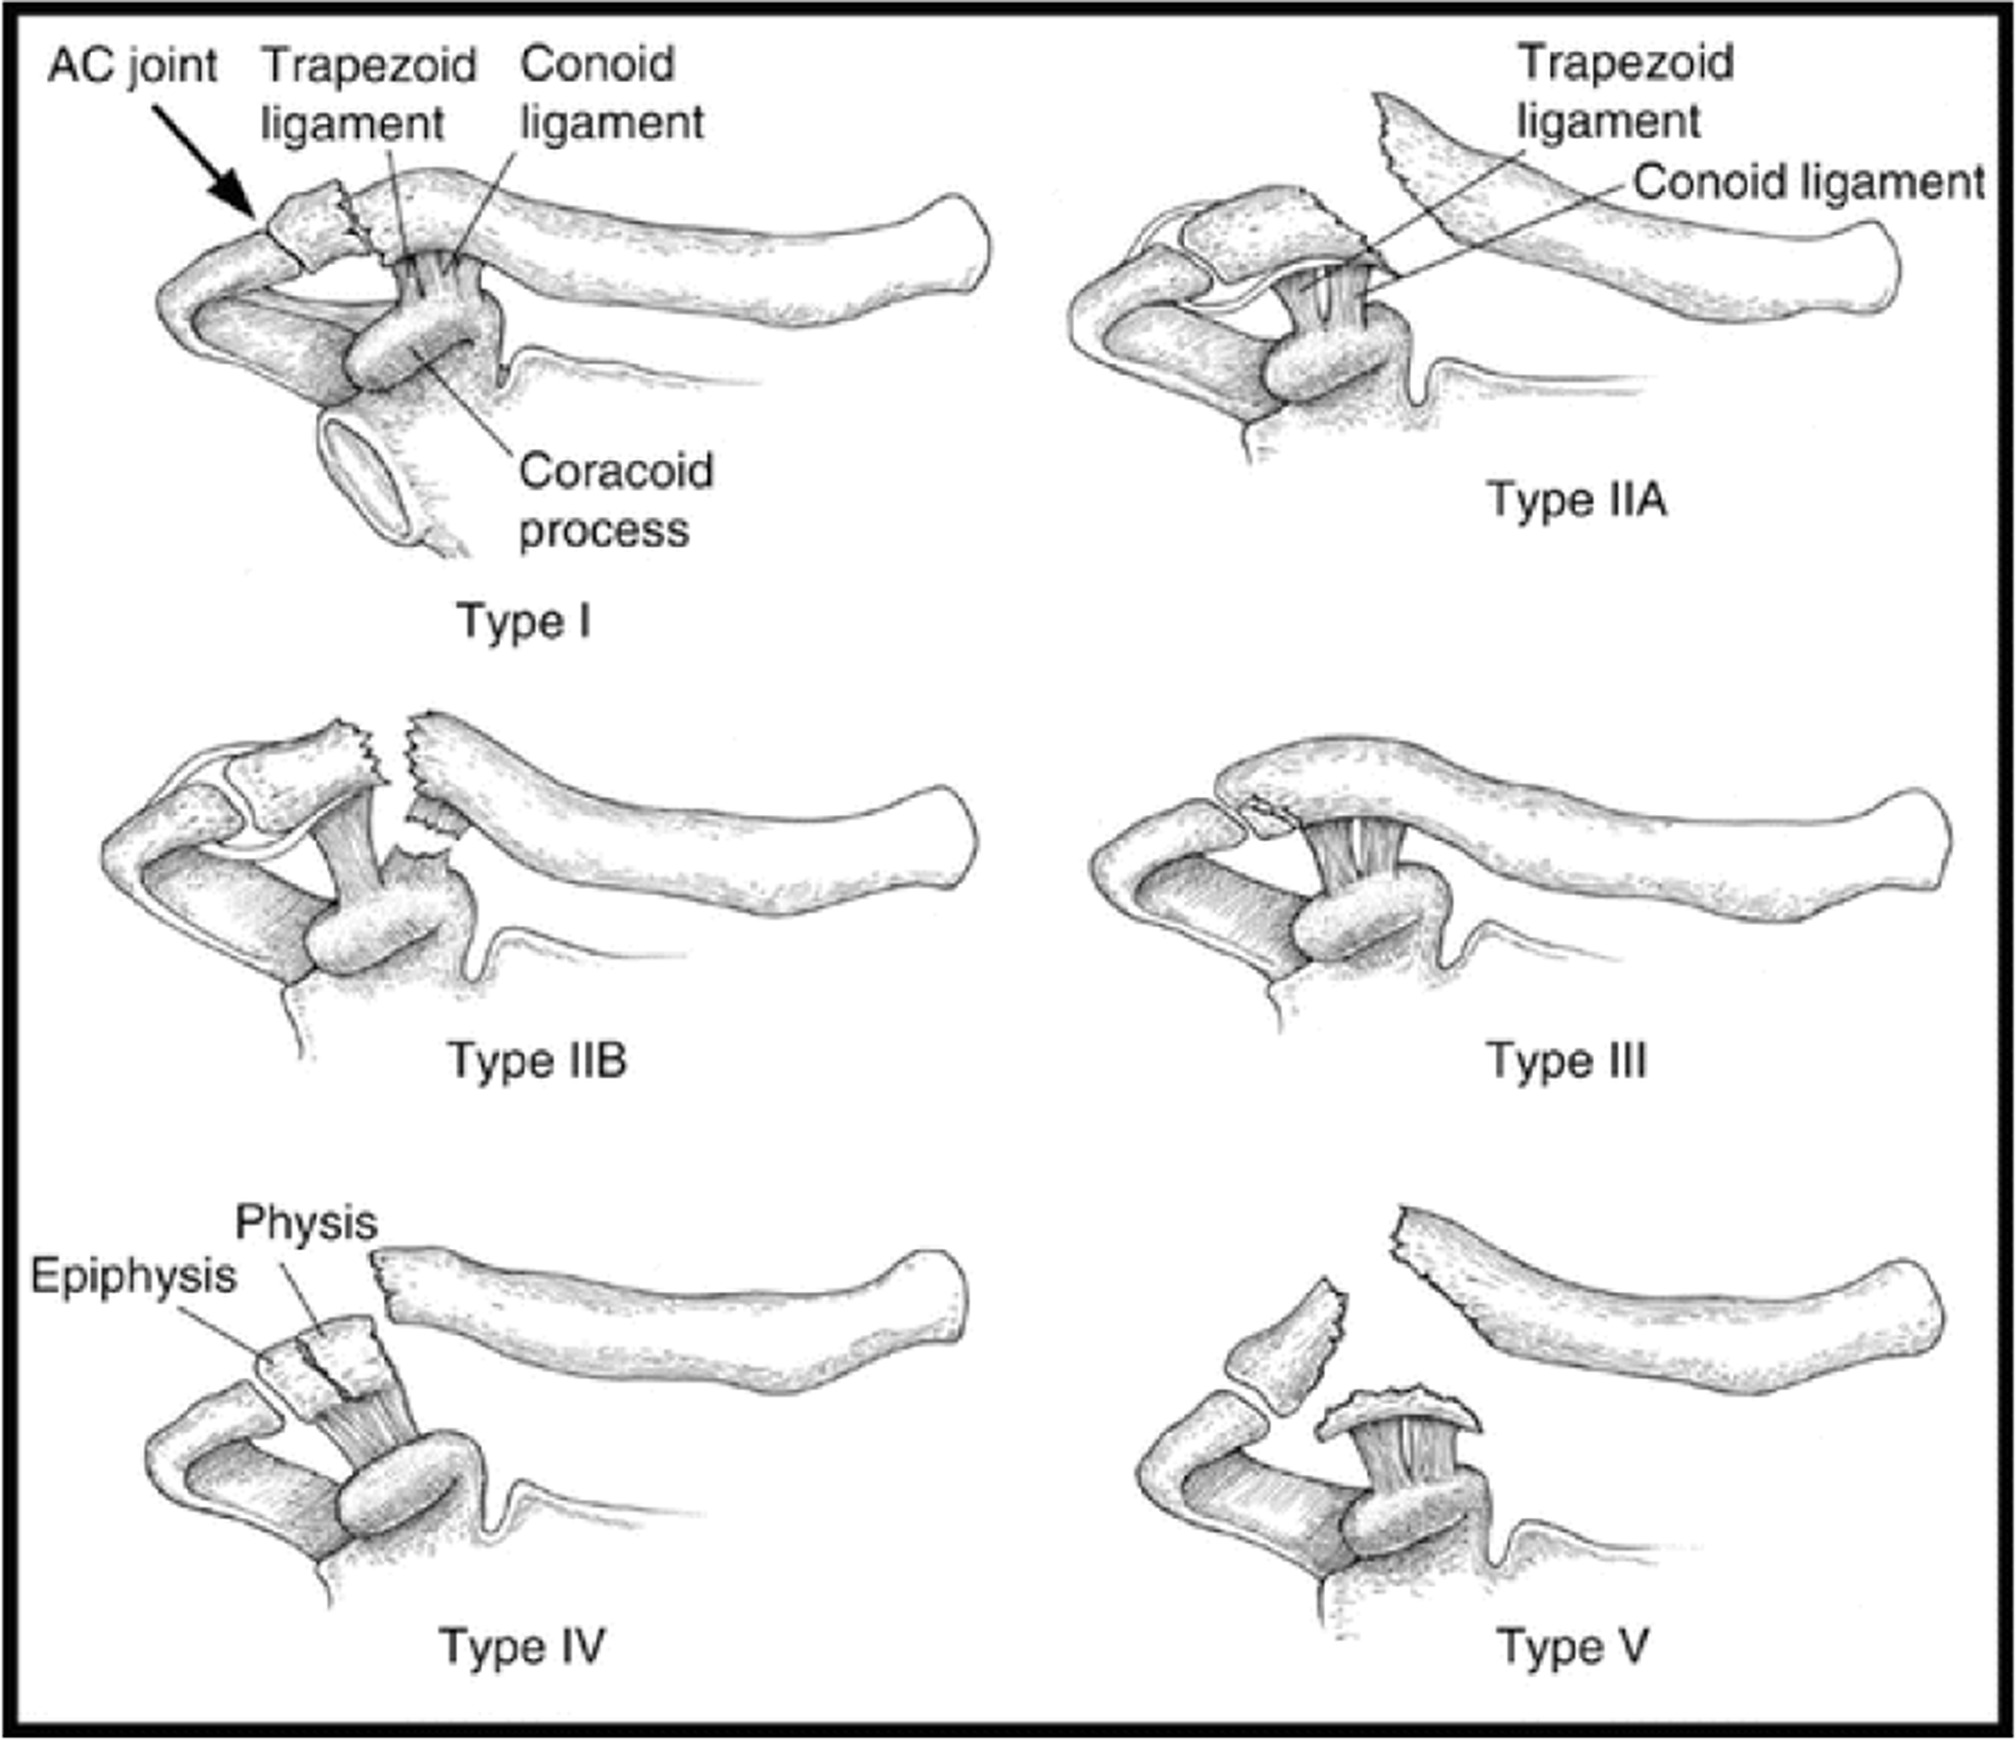 Fig. 1 
          Diagrammatic representation of the modified Neer classification for distal third clavicle fractures. AC, acromioclavicular.
        